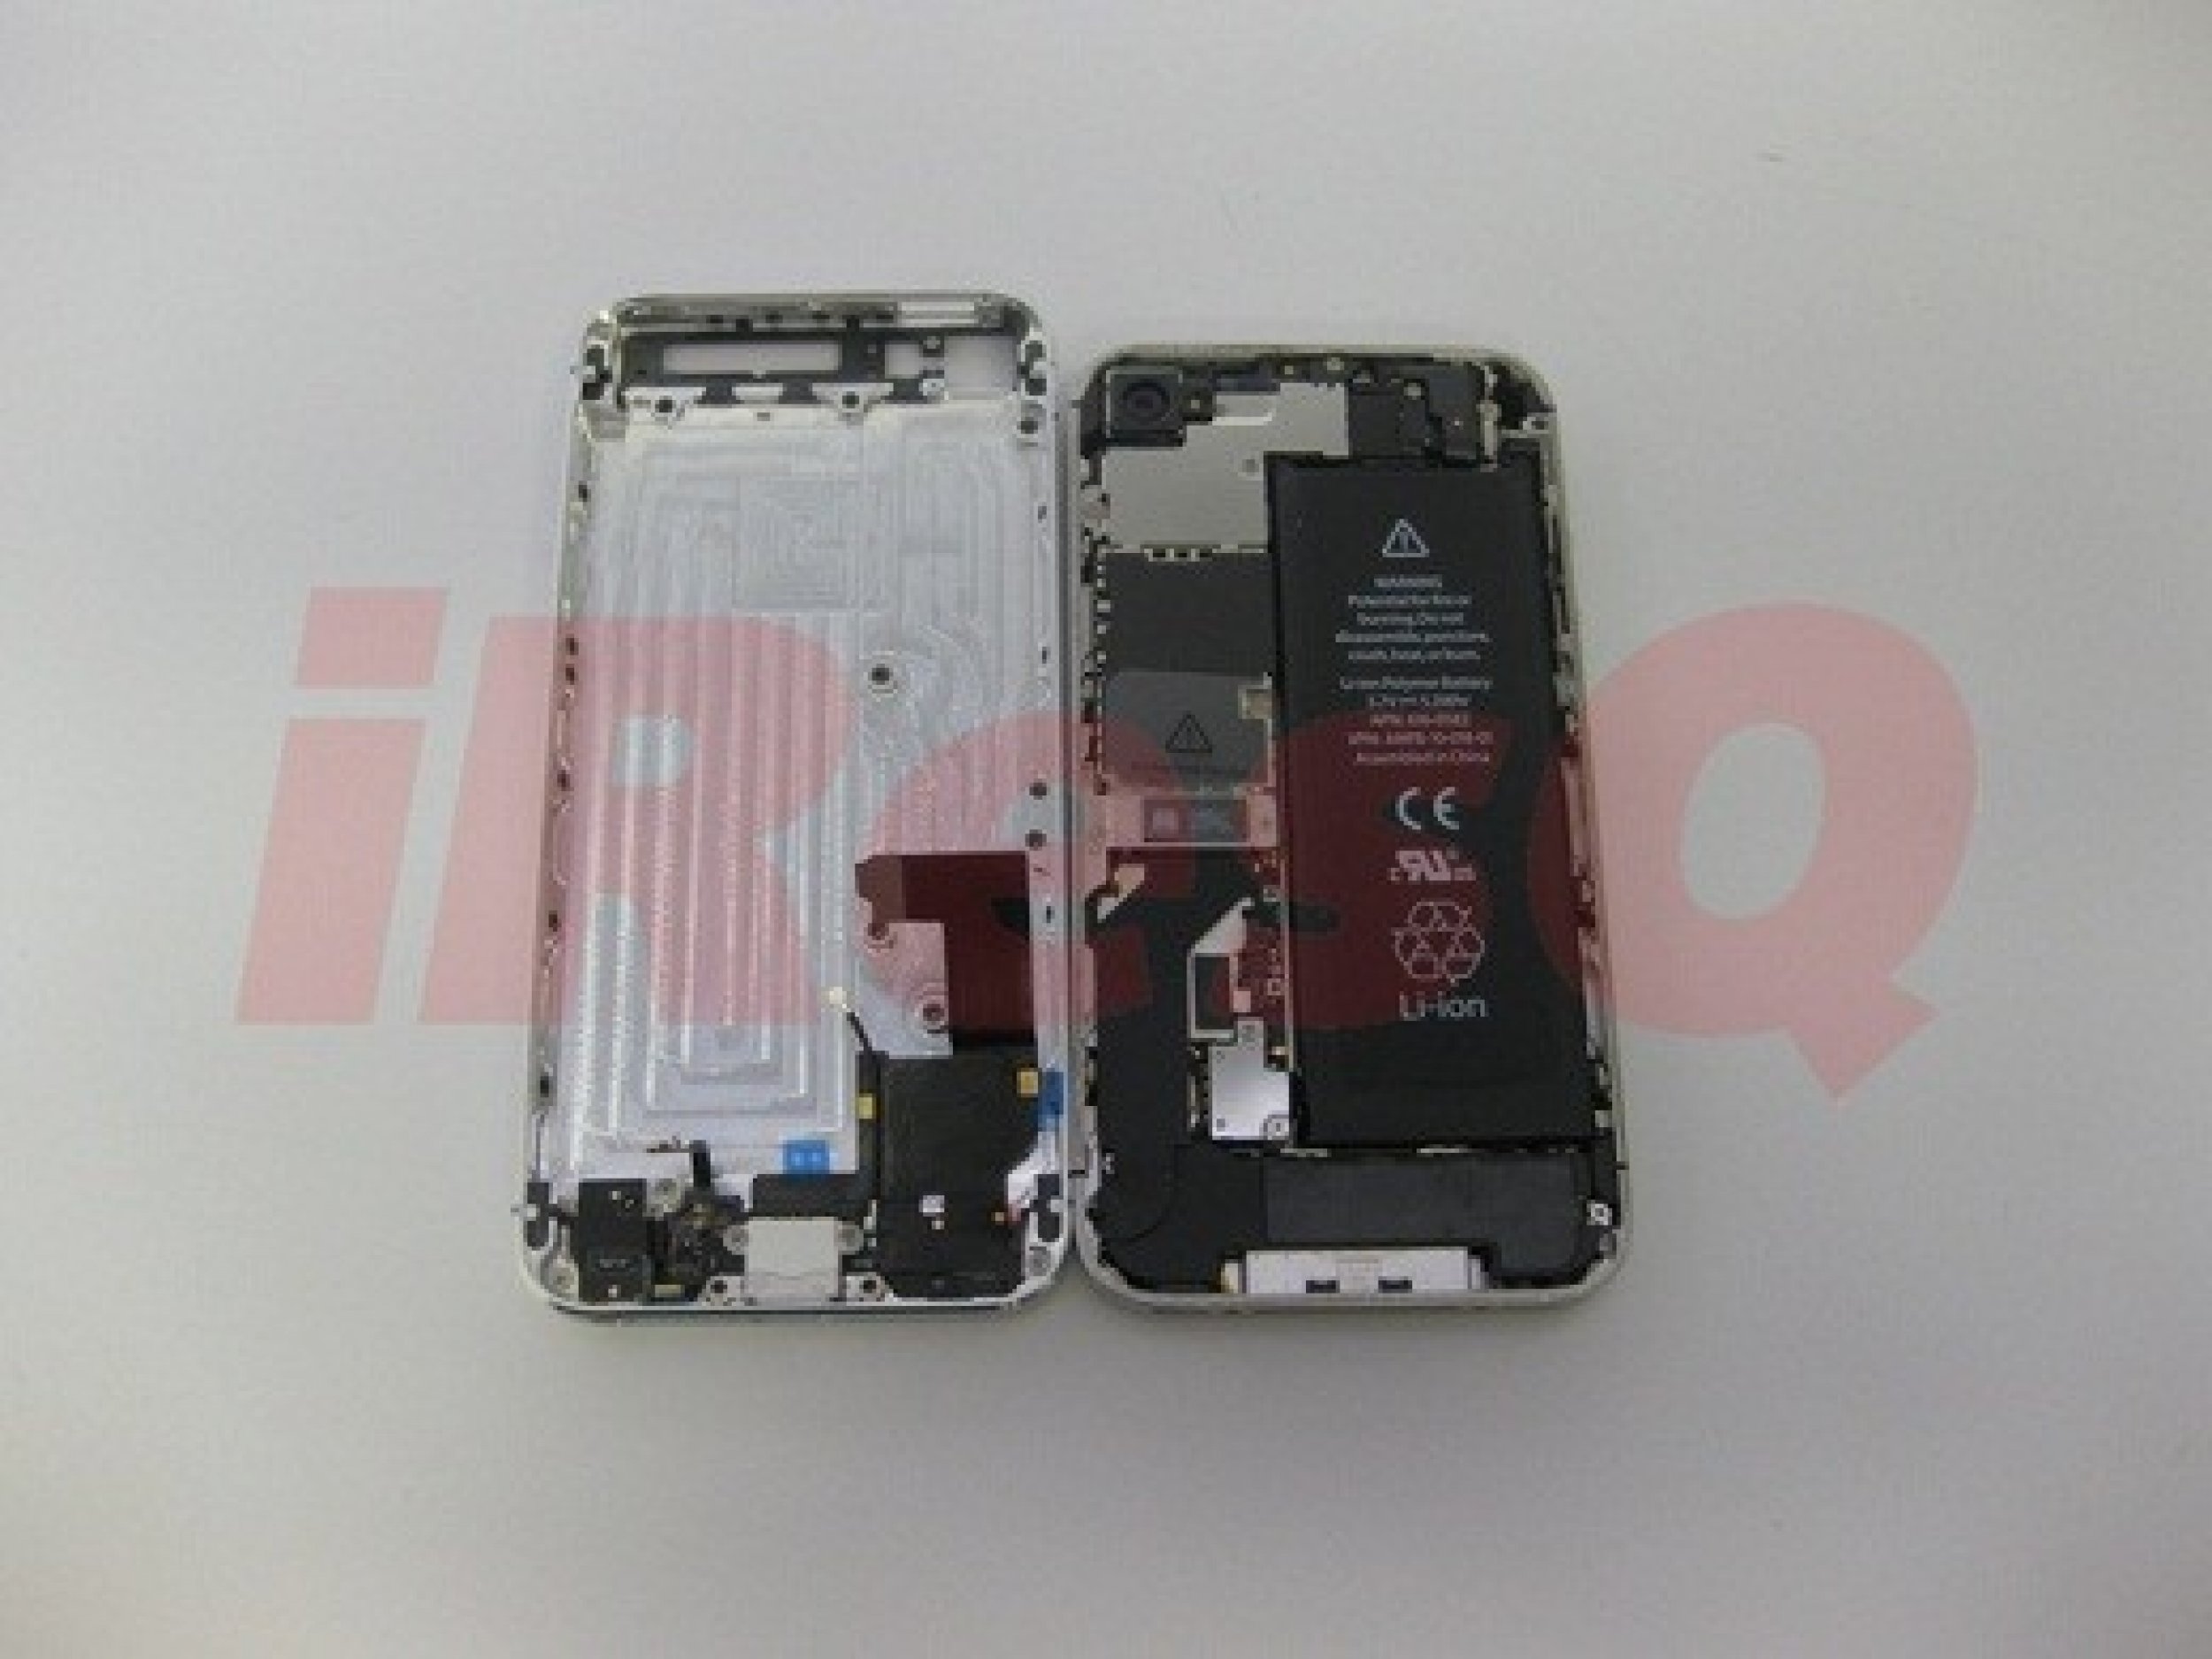 iPhone 5 Leaked Photos